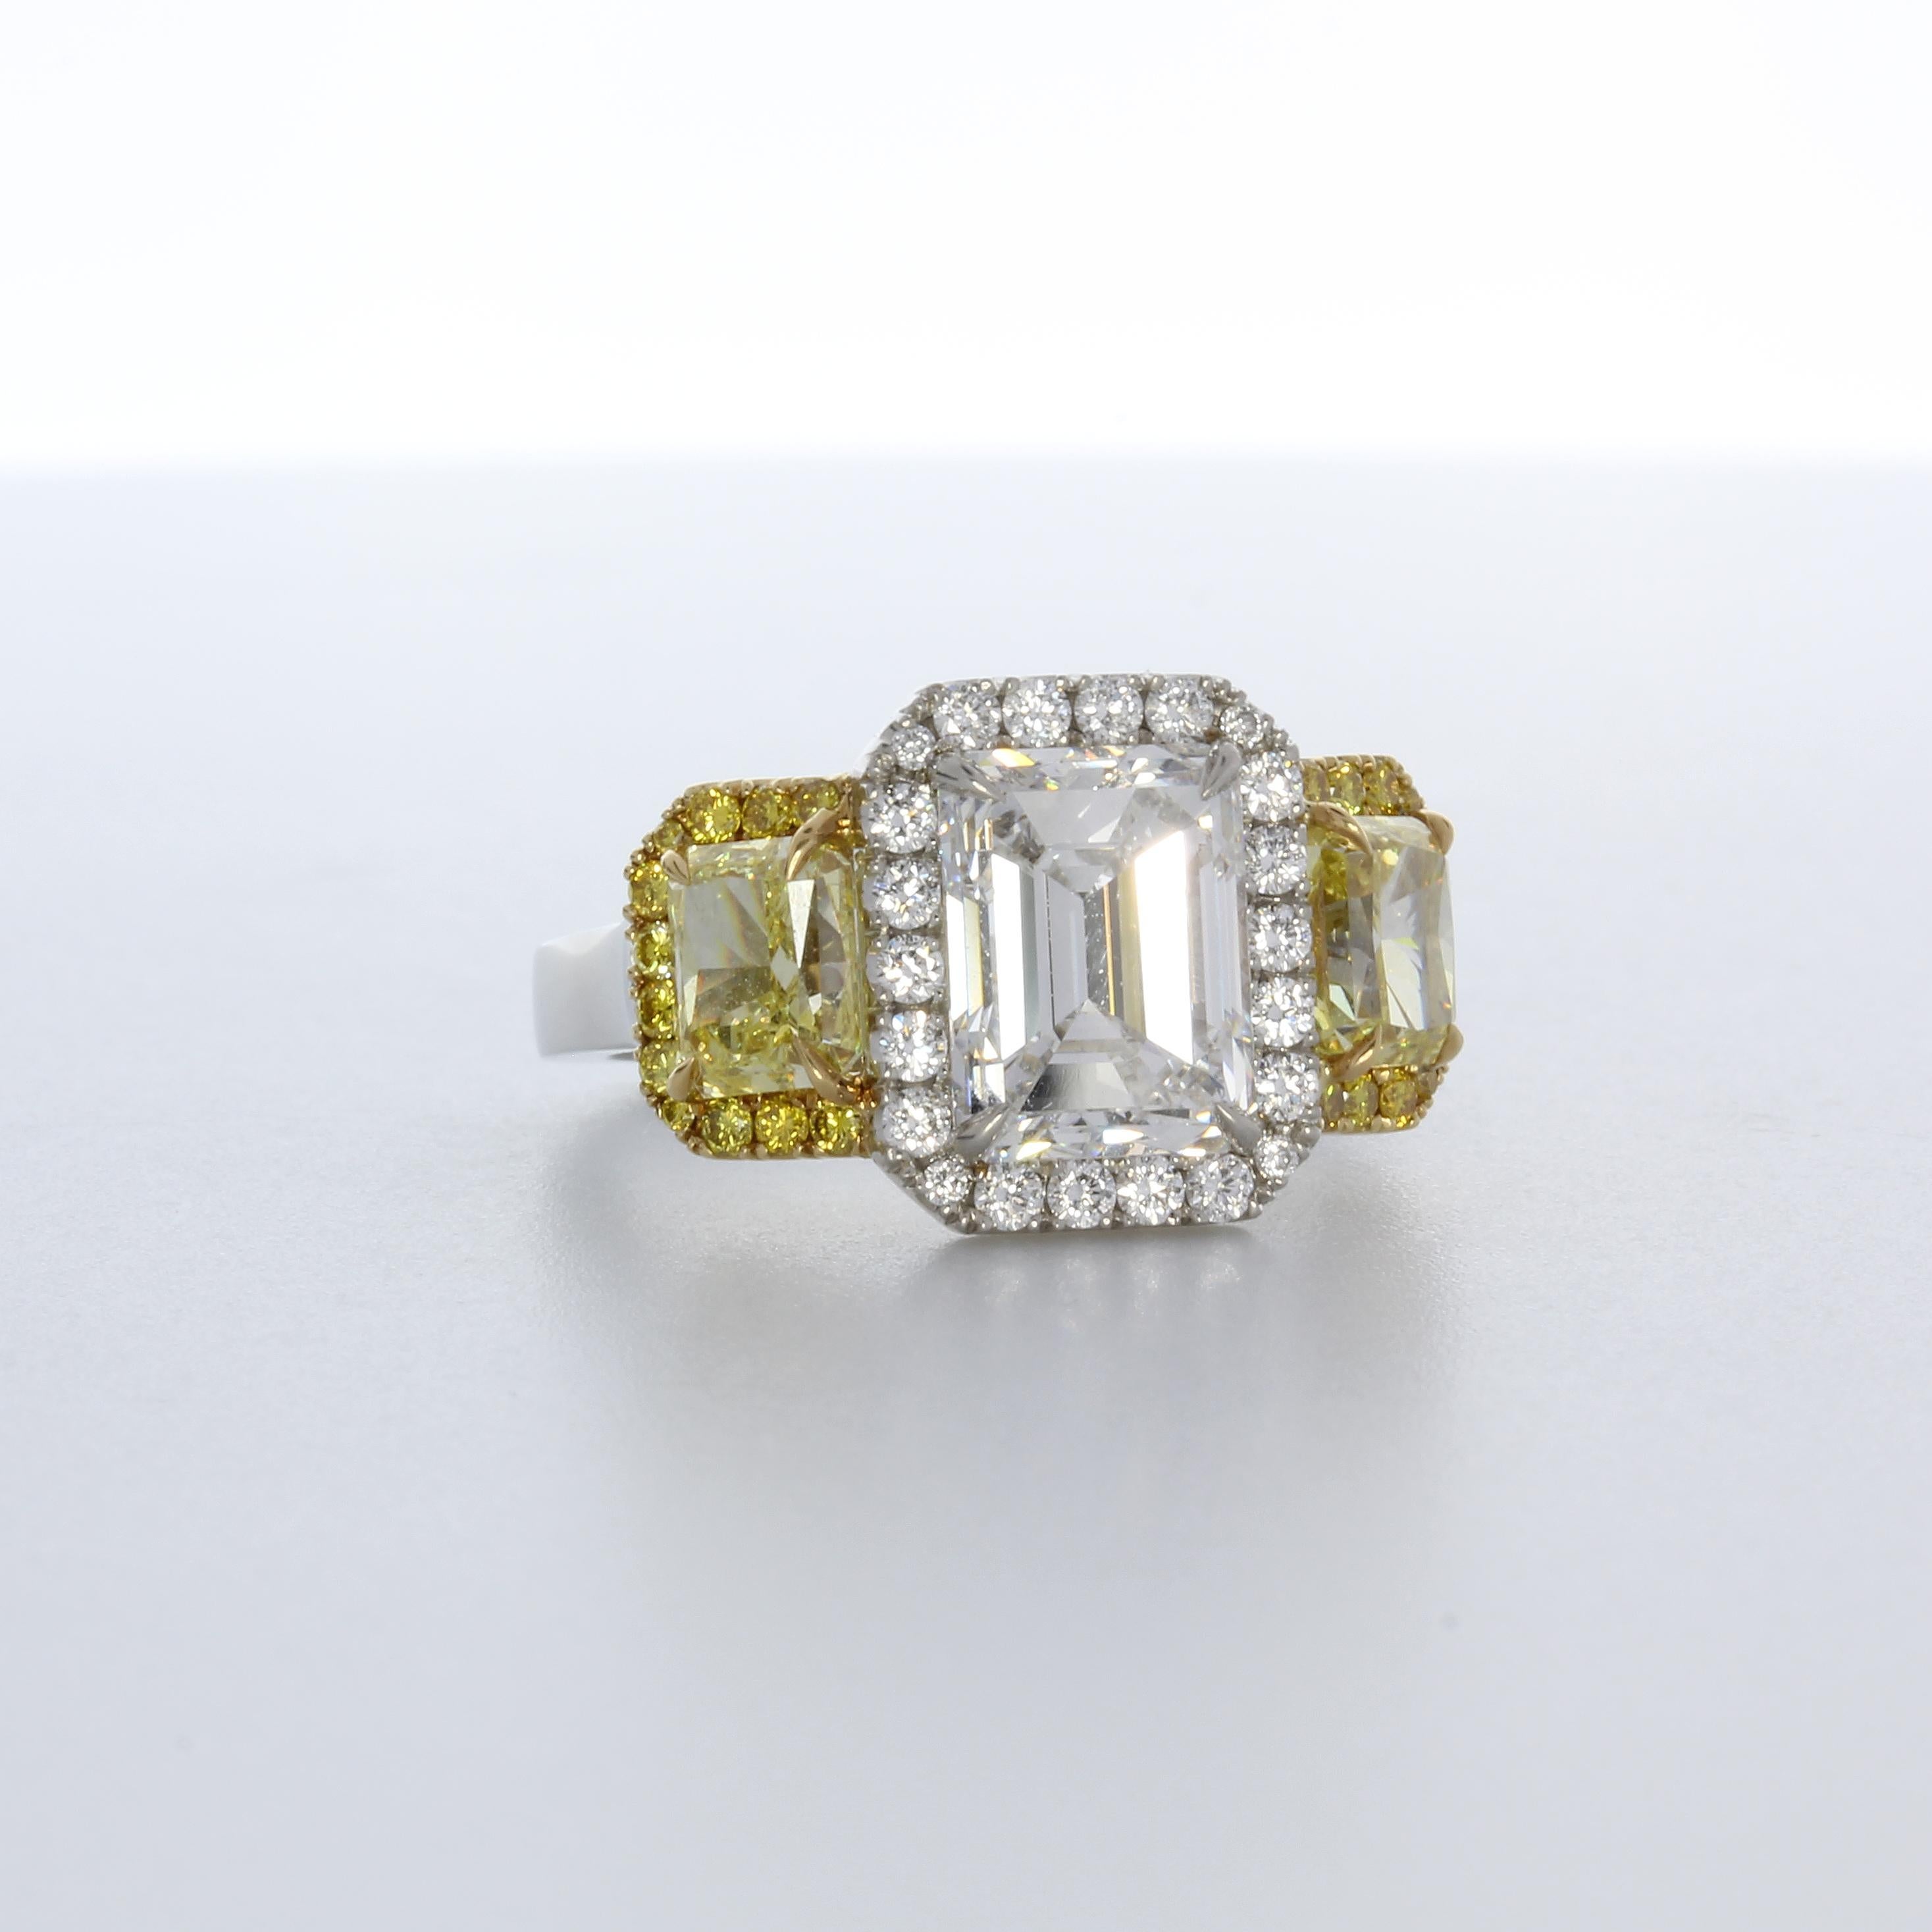 Stunning emerald cut diamond that weighs 3.04 carats flanked with two fancy intense yellow diamonds that total 1.94 carats. Intricate micro-bead setting with brilliant diamonds and 24 fancy yellow diamonds. Crafted in platinum and 18k yellow gold.